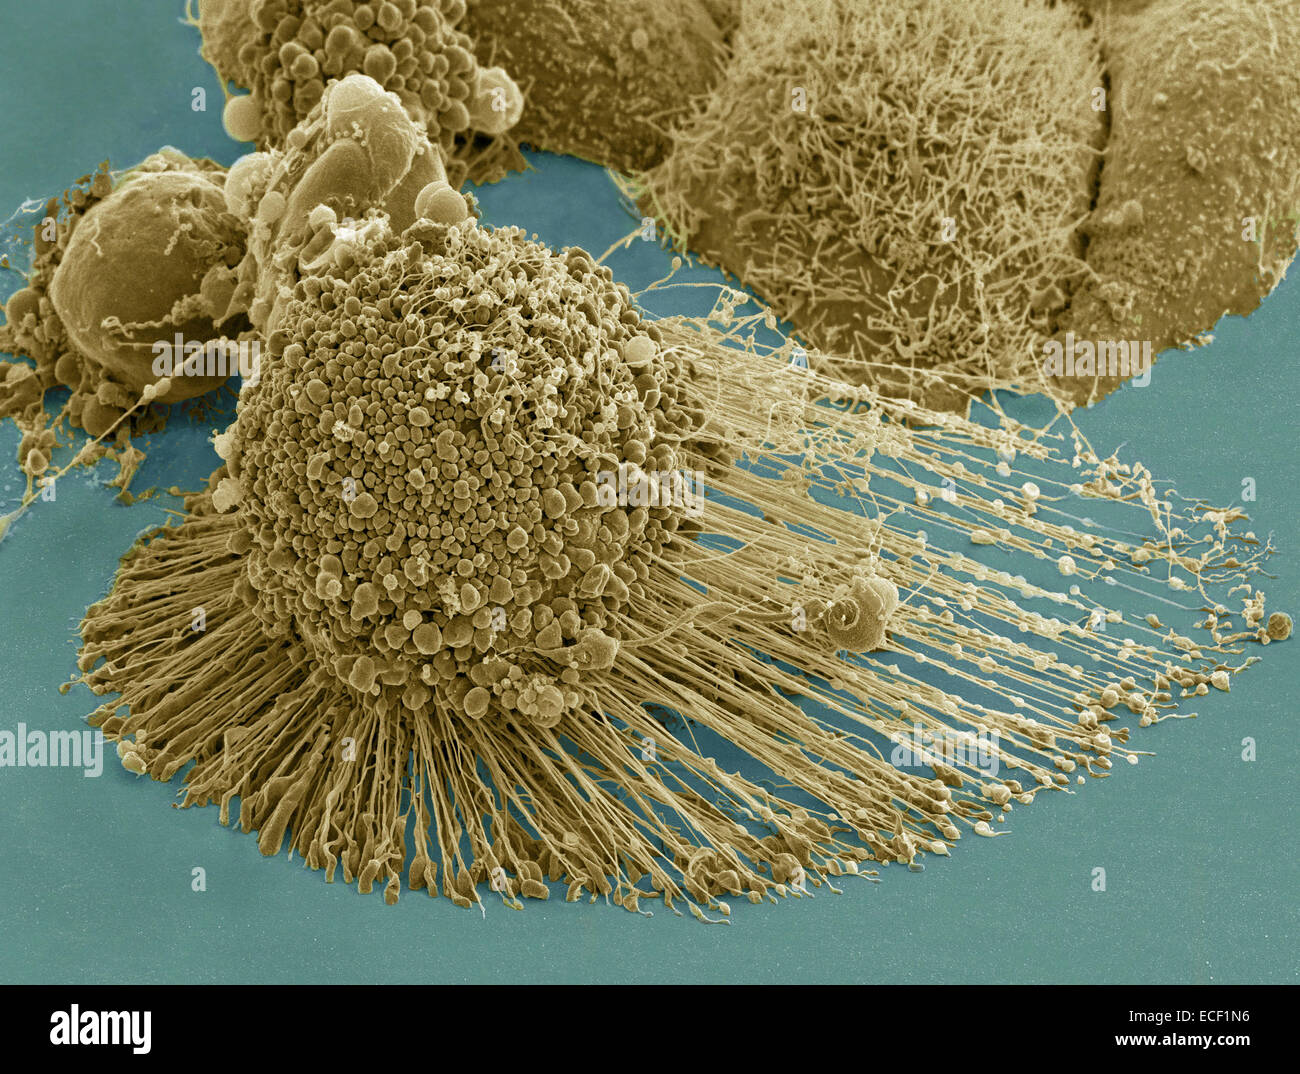 Scanning electron micrograph of an apoptotic HeLa cell. Zeiss Merlin HR-SEM. Stock Photo